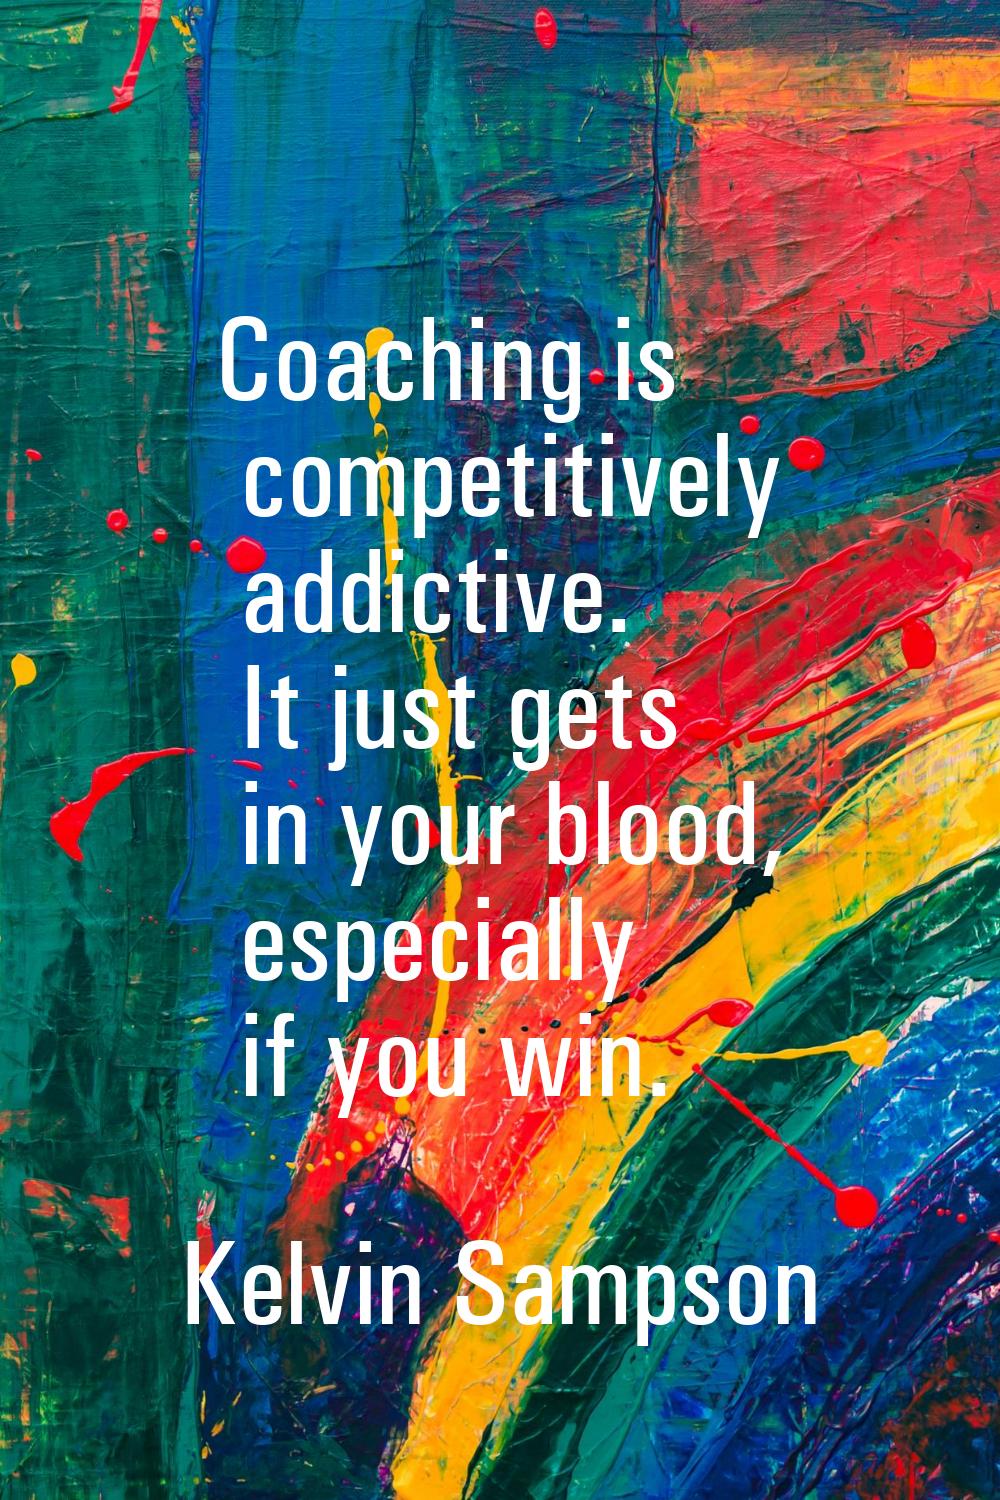 Coaching is competitively addictive. It just gets in your blood, especially if you win.